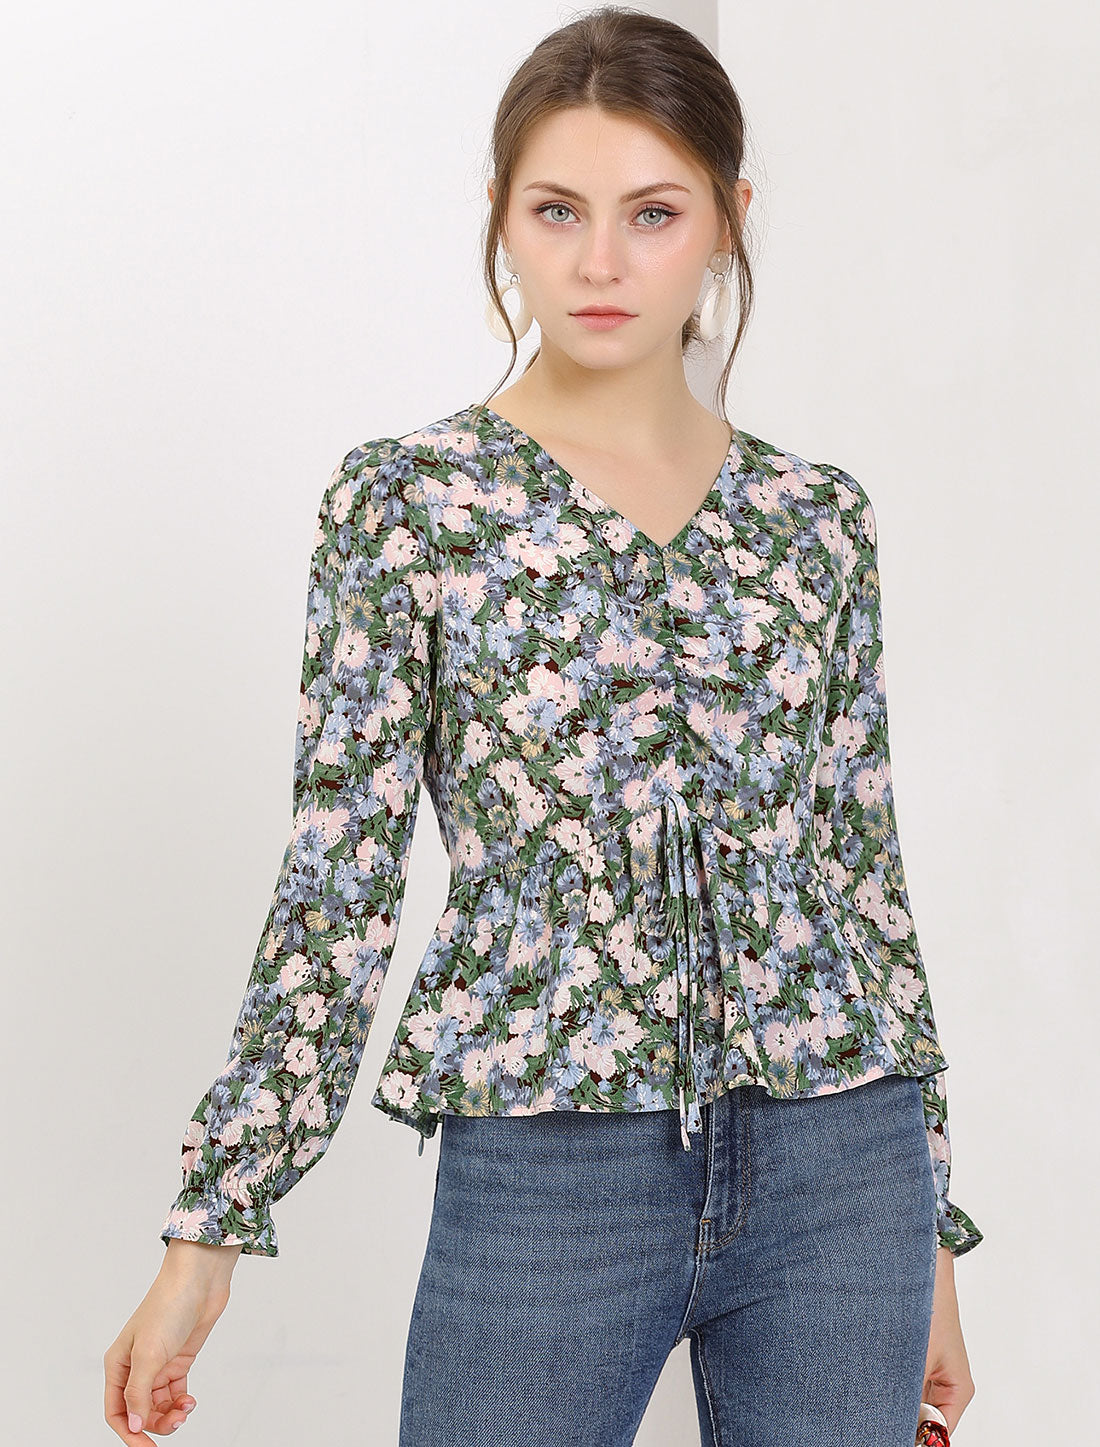 Allegra K V Neck Ruched Long Ruffle Sleeve Floral Printed Peplum Blouse Top